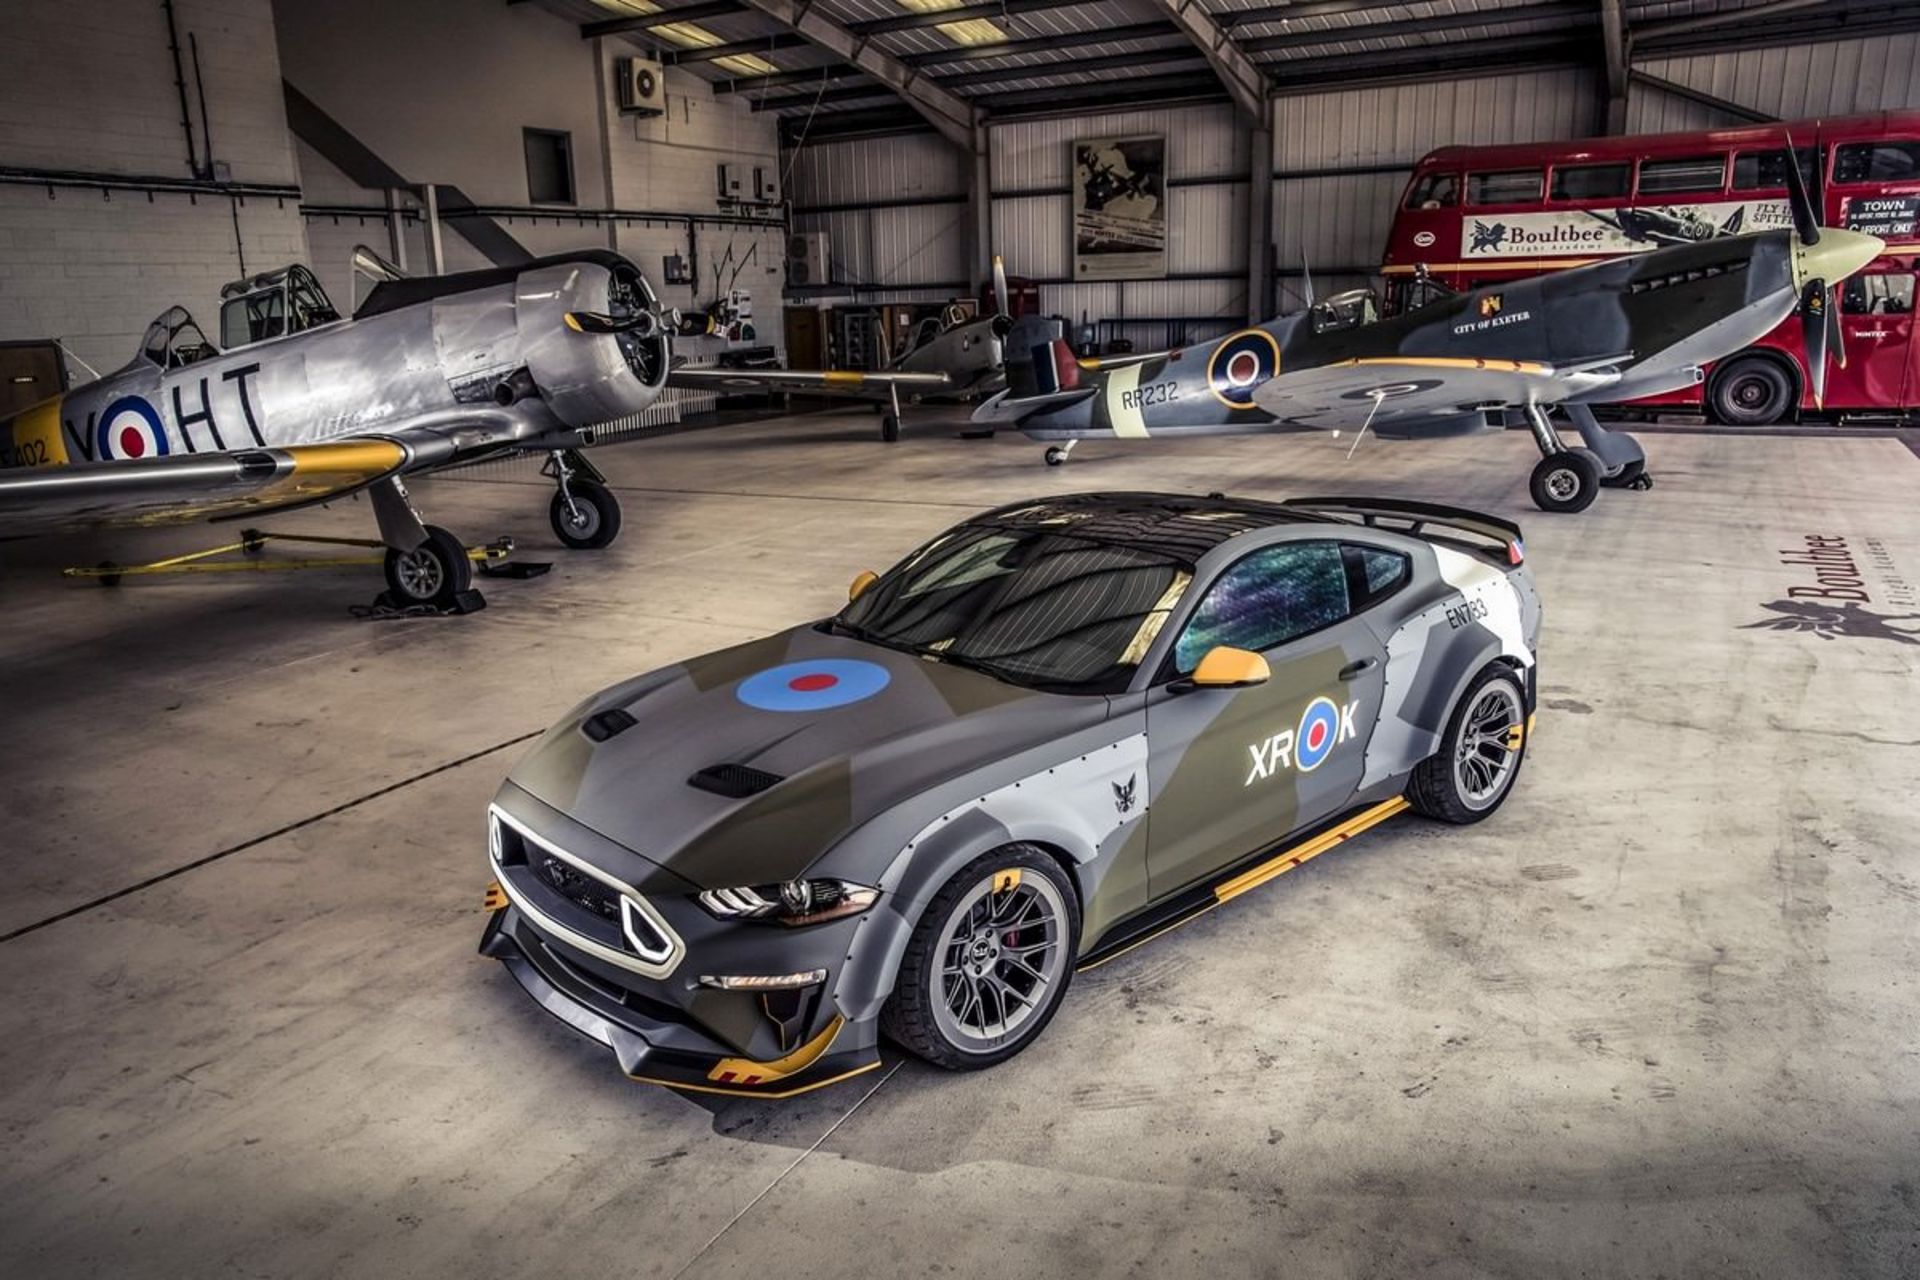 Eagle Squadron Mustang